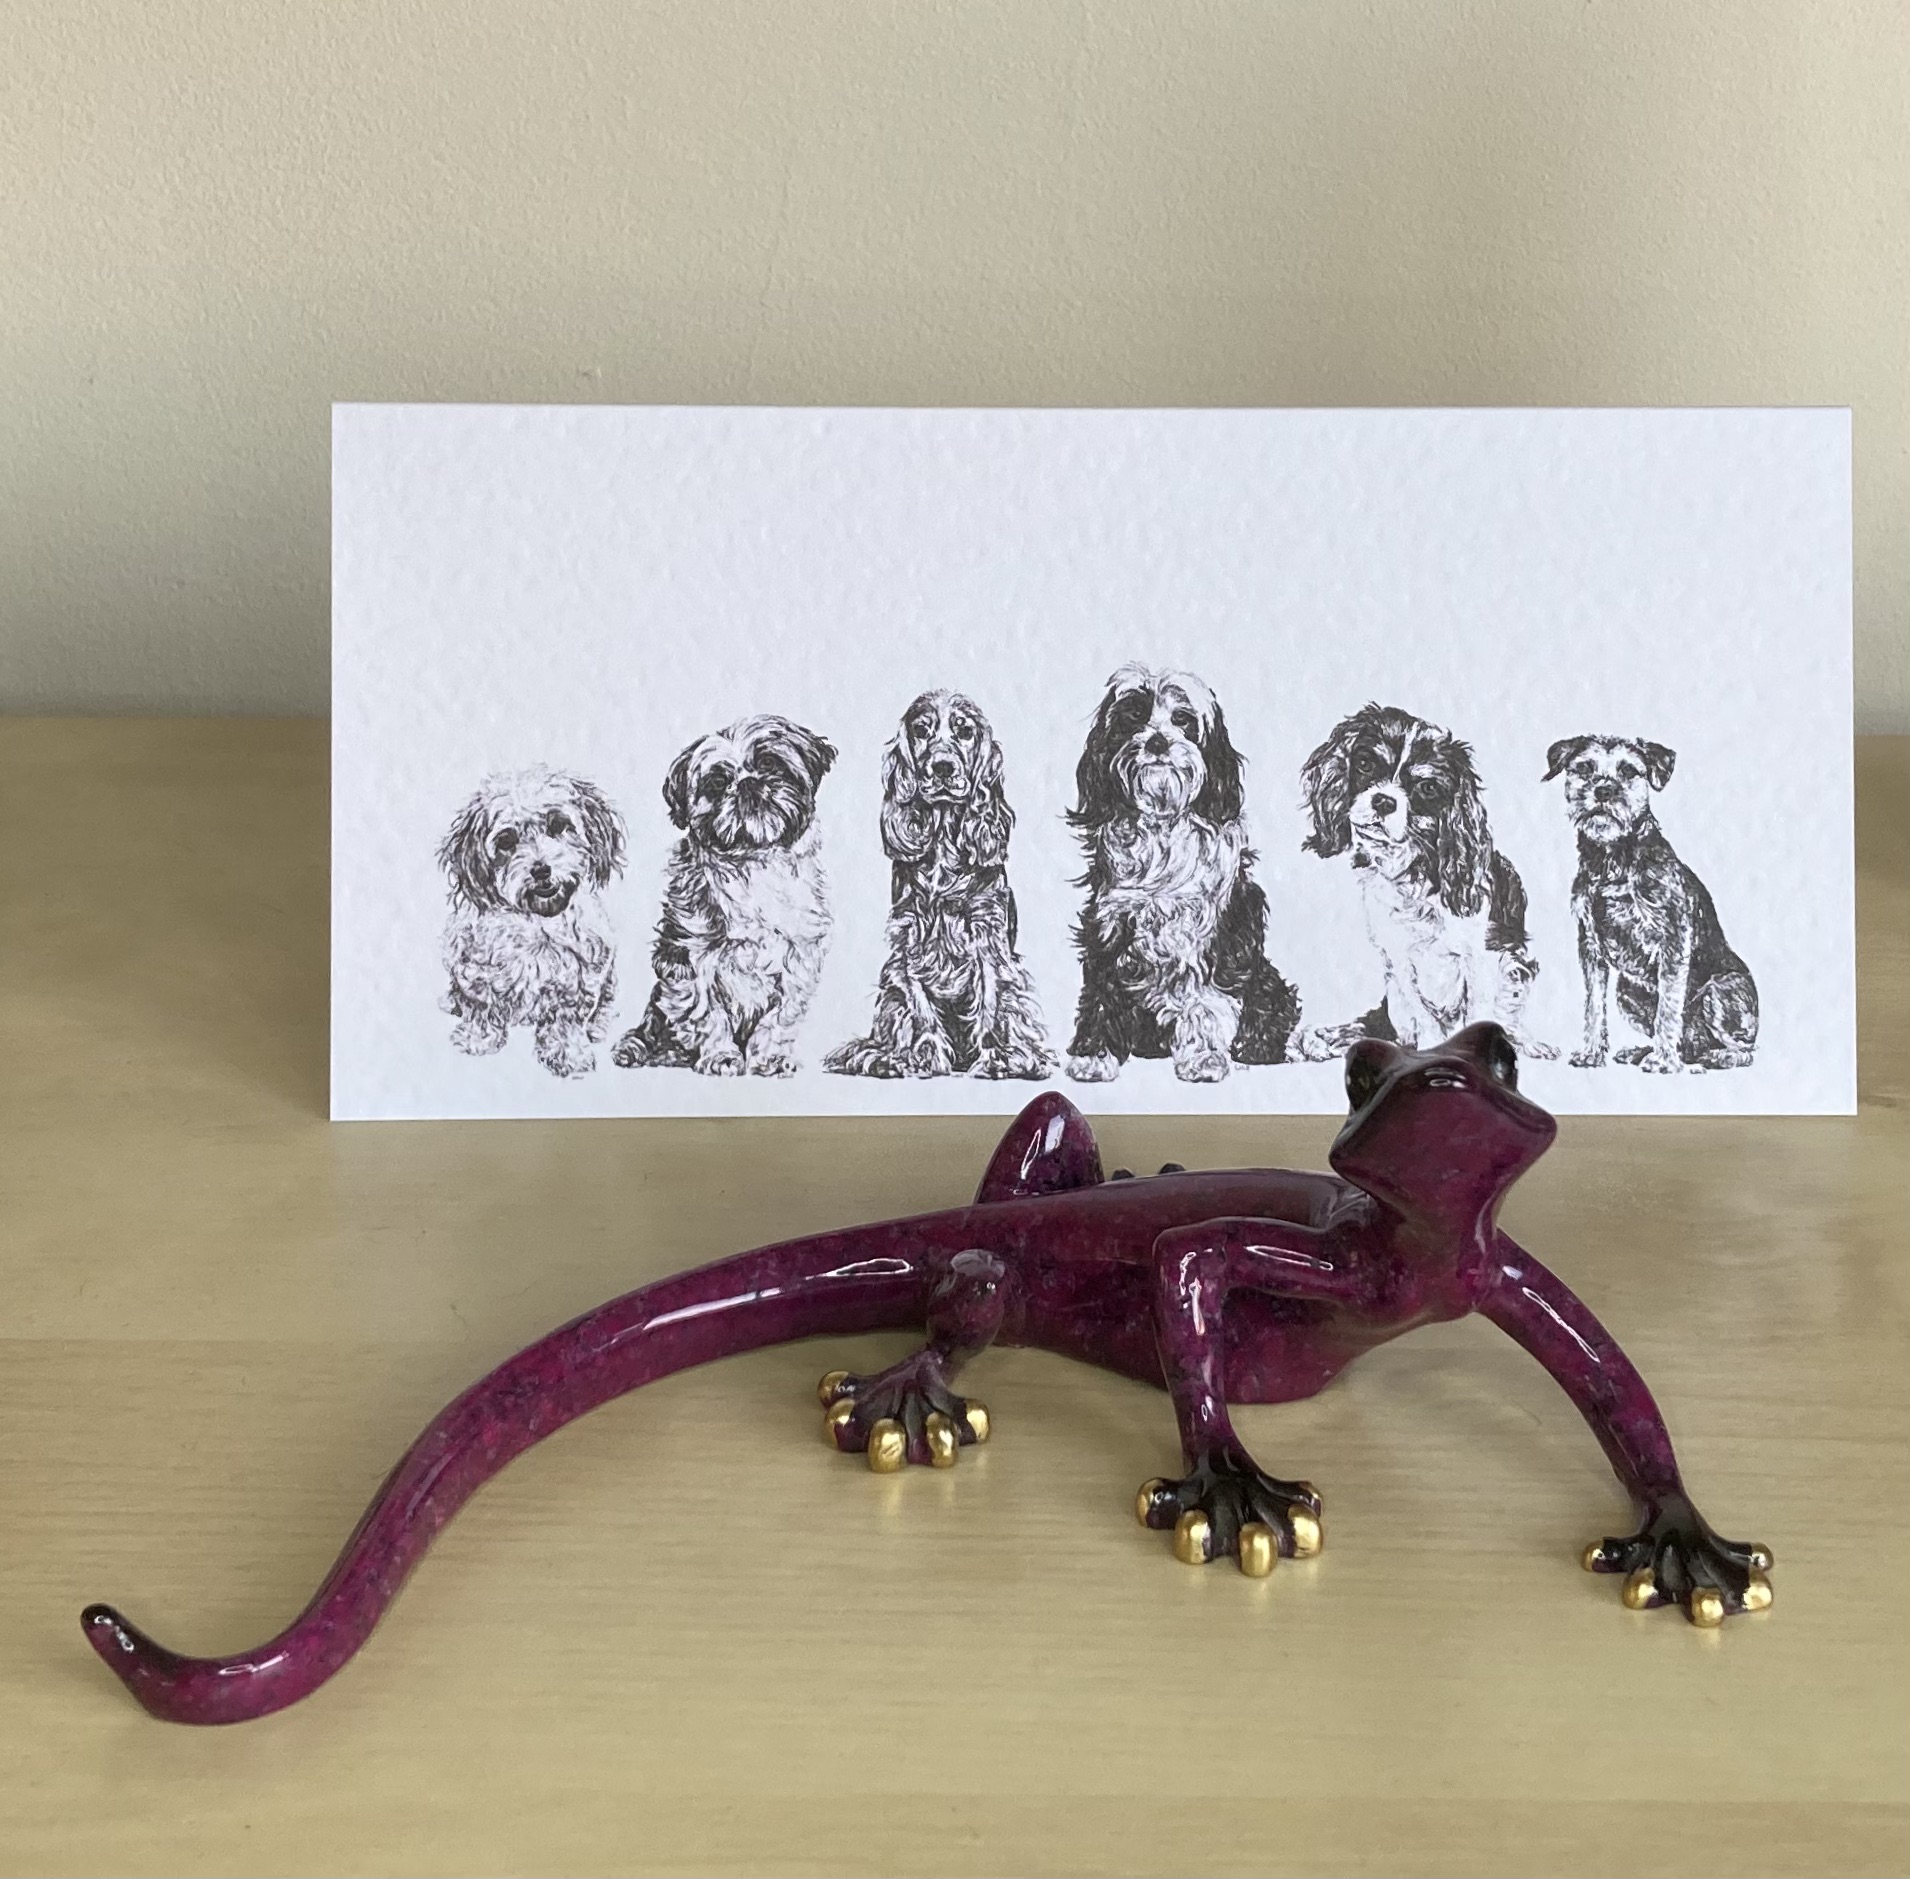 6 dogs pen and ink illustration greetings card, Cavachon, Shih Tzu, Cocker Spaniel, Tibetan Terrier, Cavalier King Charles Spaniel and Border Terrier by Louisa Hill